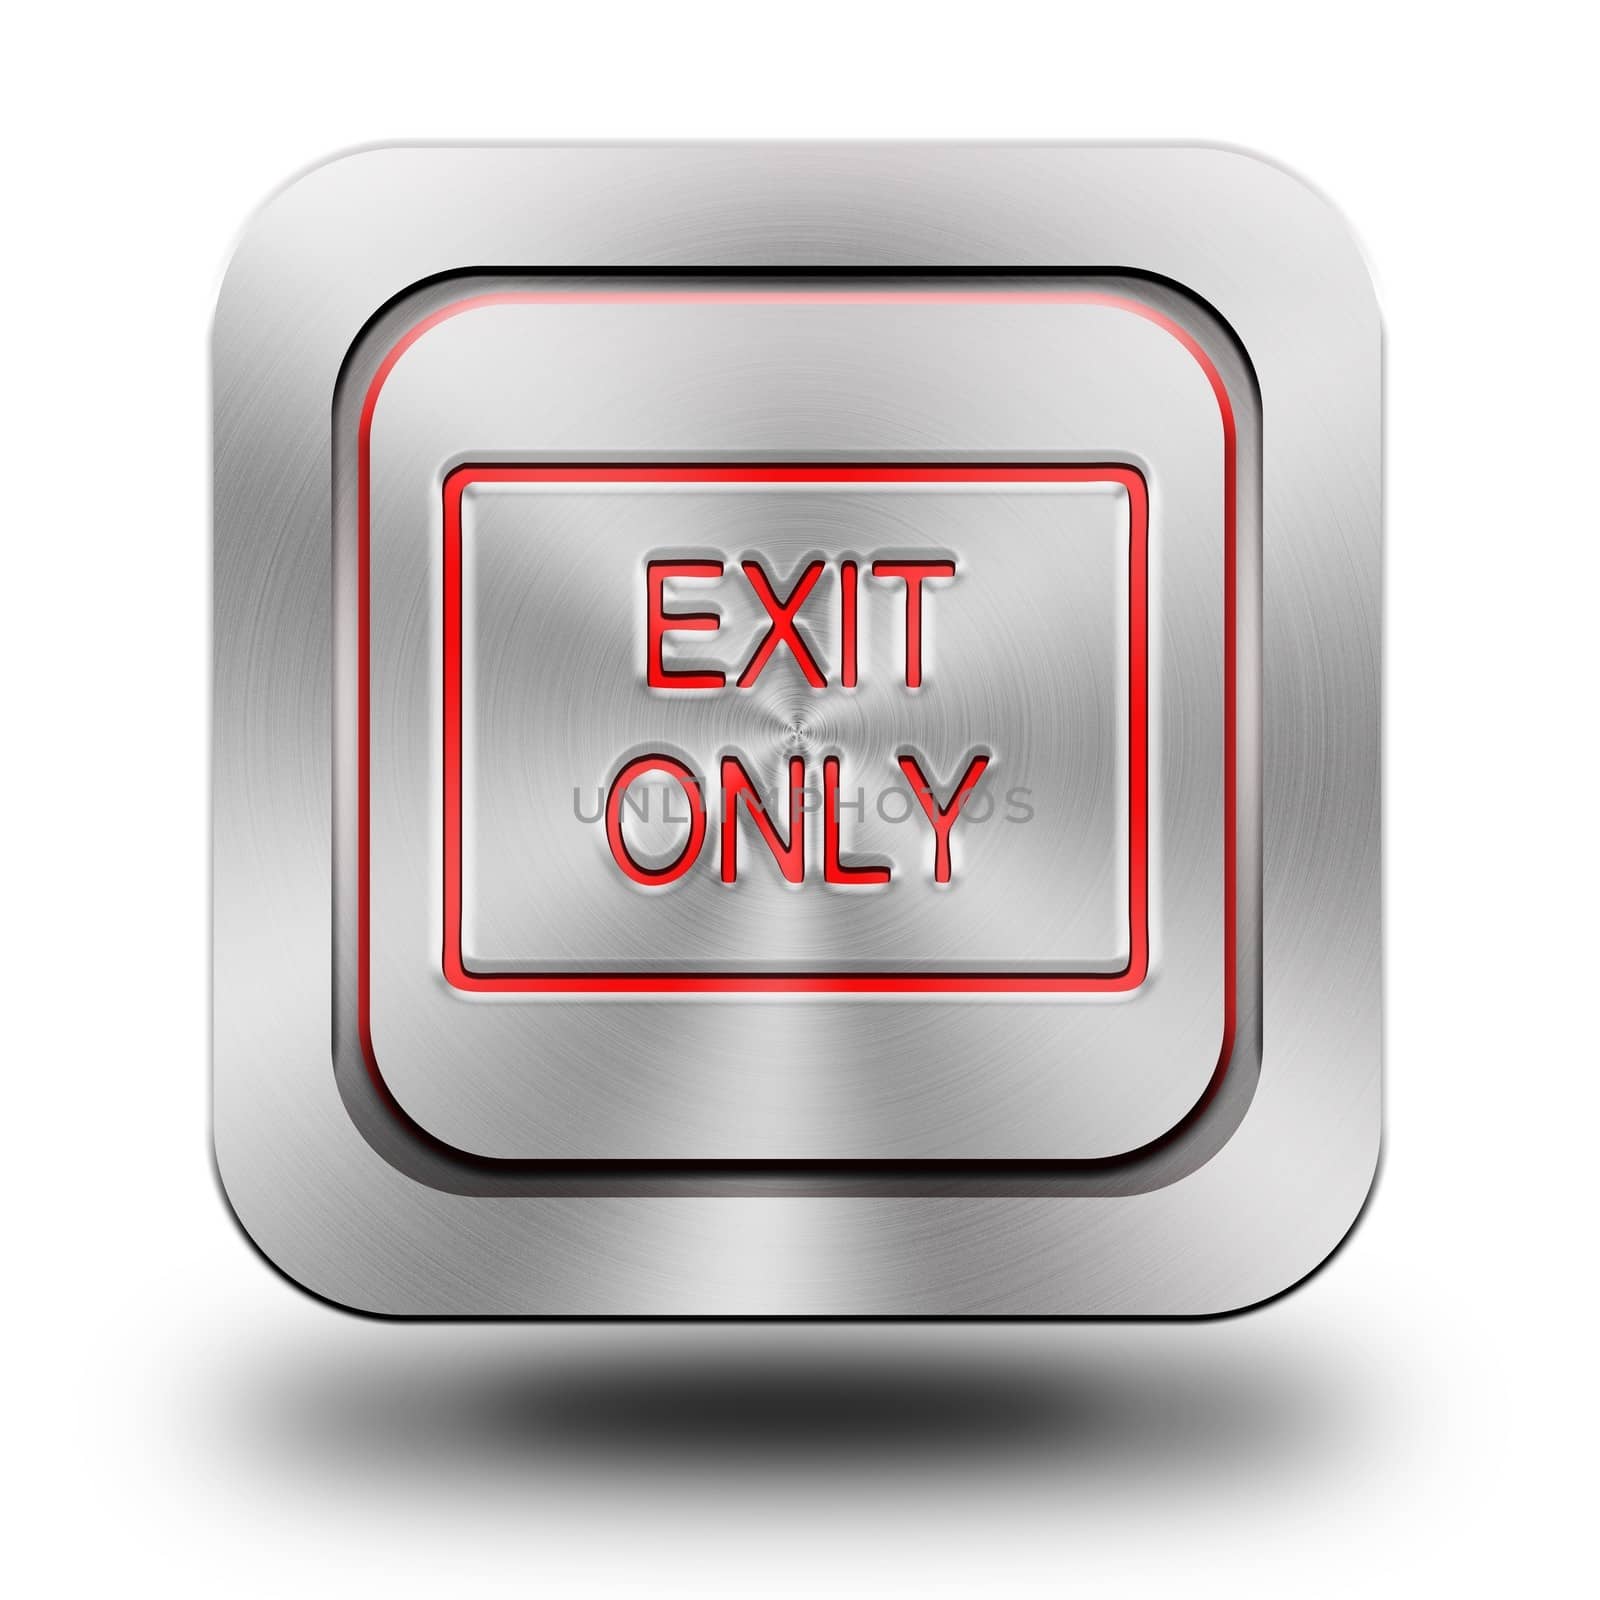 Exit only, brushed aluminum or stainless steel, glossy icon, button, sign